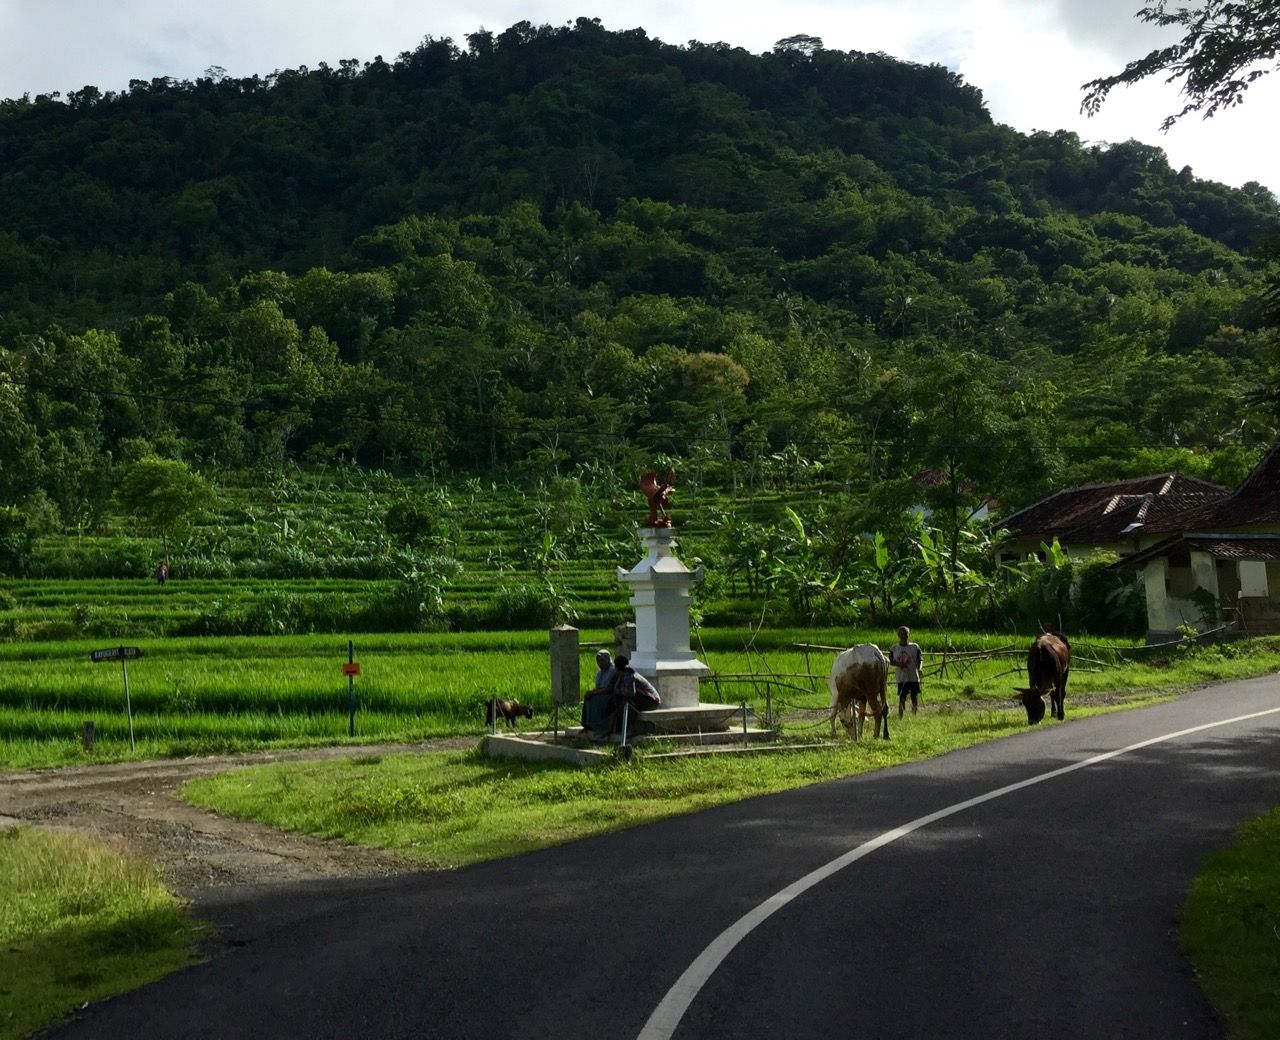 Cows feeding on grass near a road with jungle in the background.